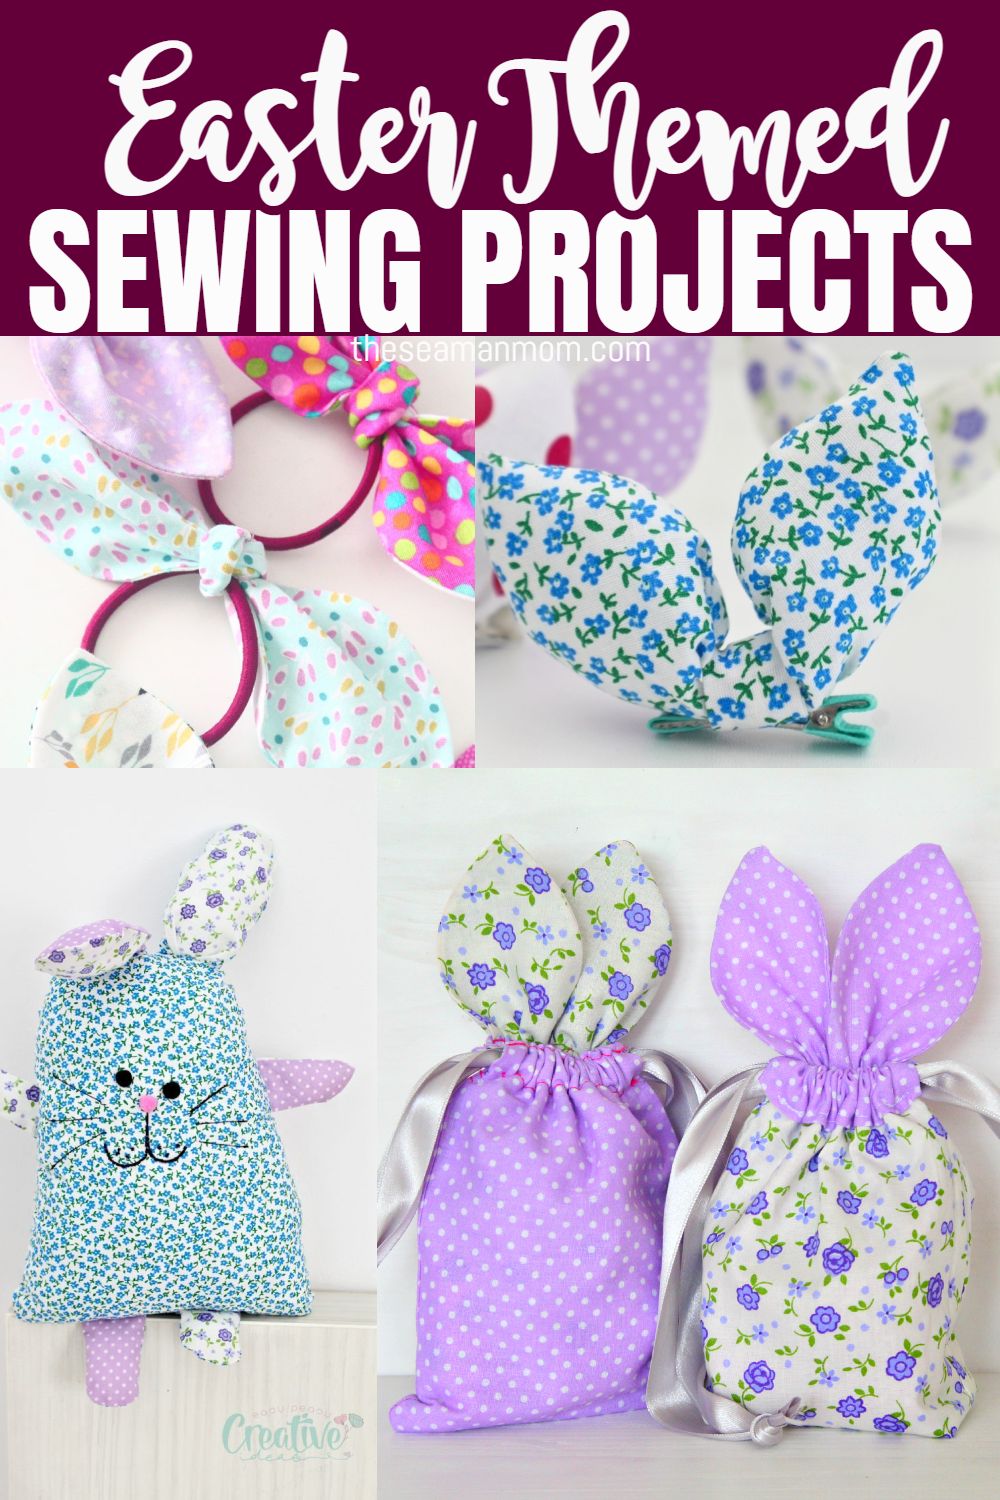 Bunny-approved! 9 Must-Try Easter Sewing Projects